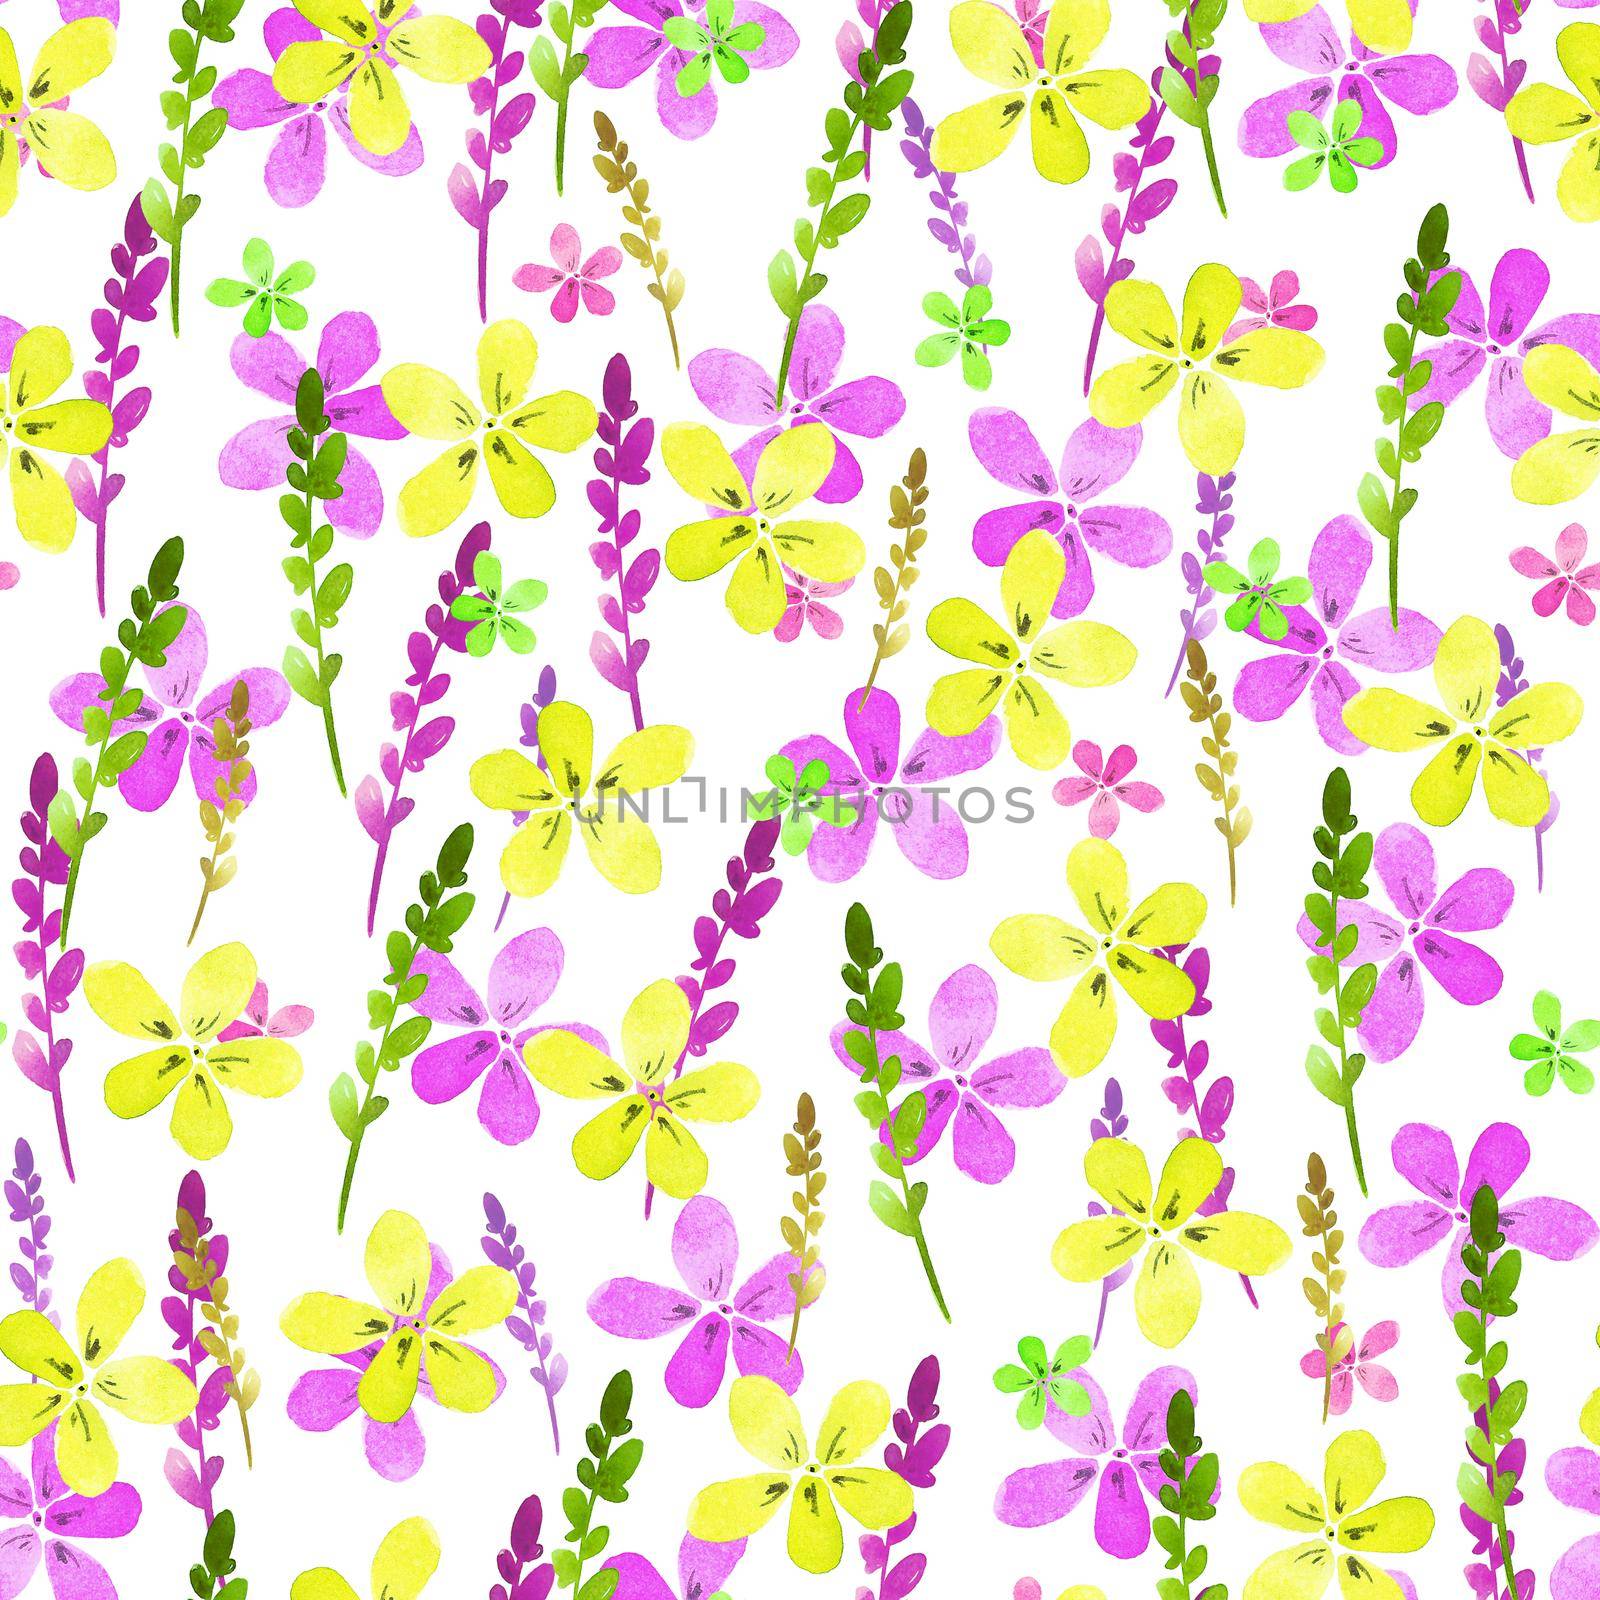 Seamless floral pattern with watercolor yellow pink flowers and leaves in vintage style on white background. Hand made. Ornate for textile, fabric, wallpaper, print. Nature illustration. Painting elements.